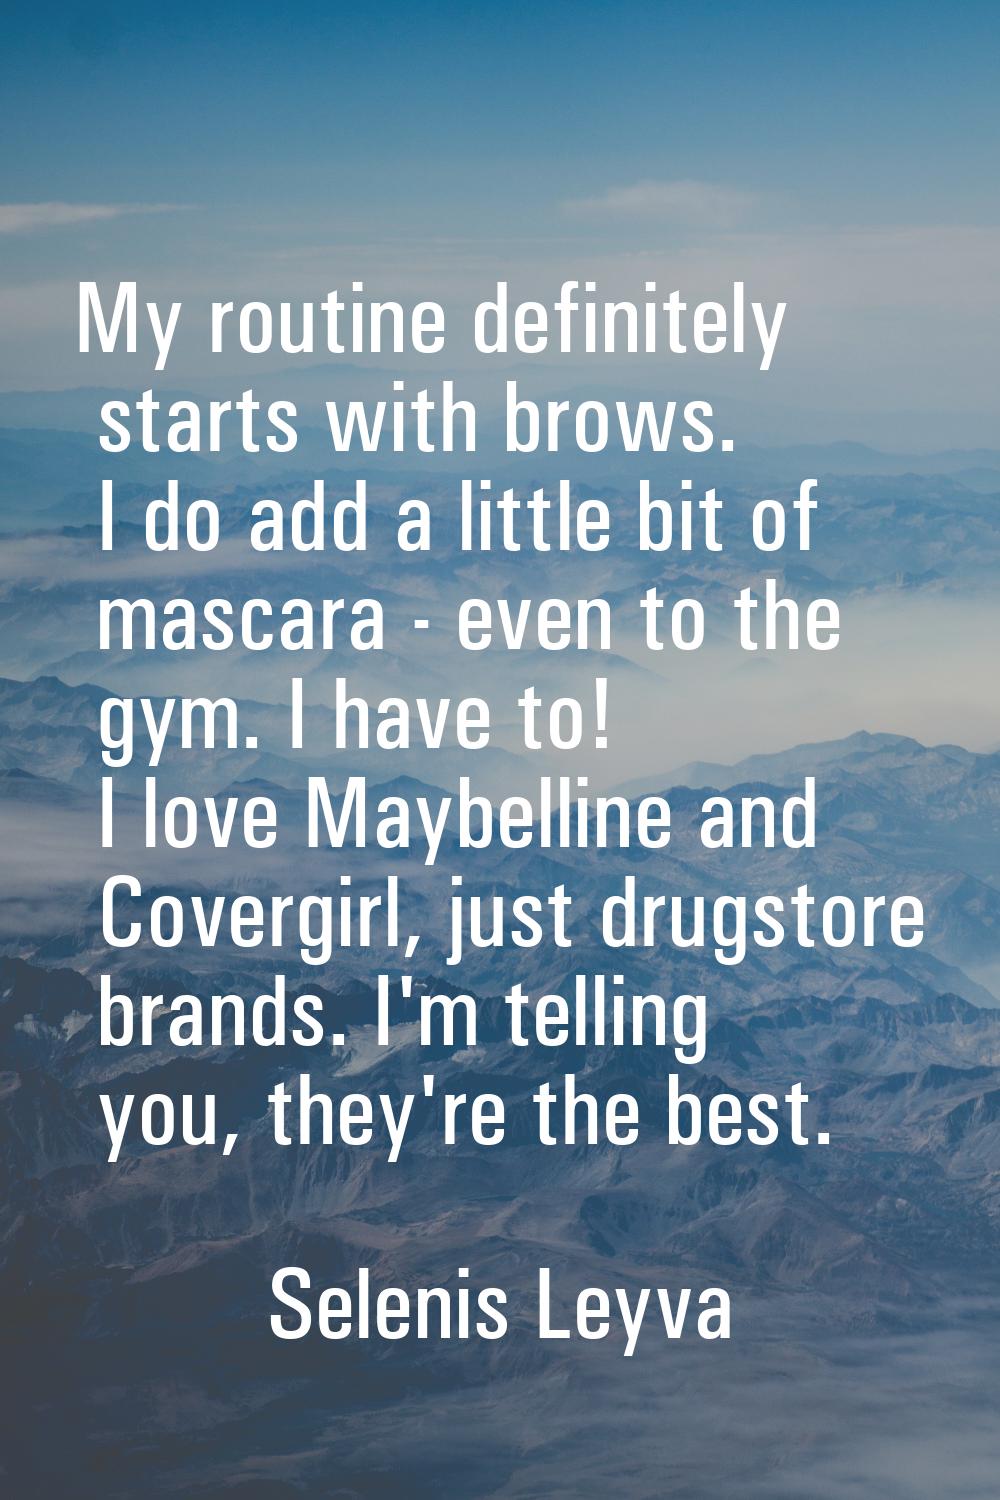 My routine definitely starts with brows. I do add a little bit of mascara - even to the gym. I have